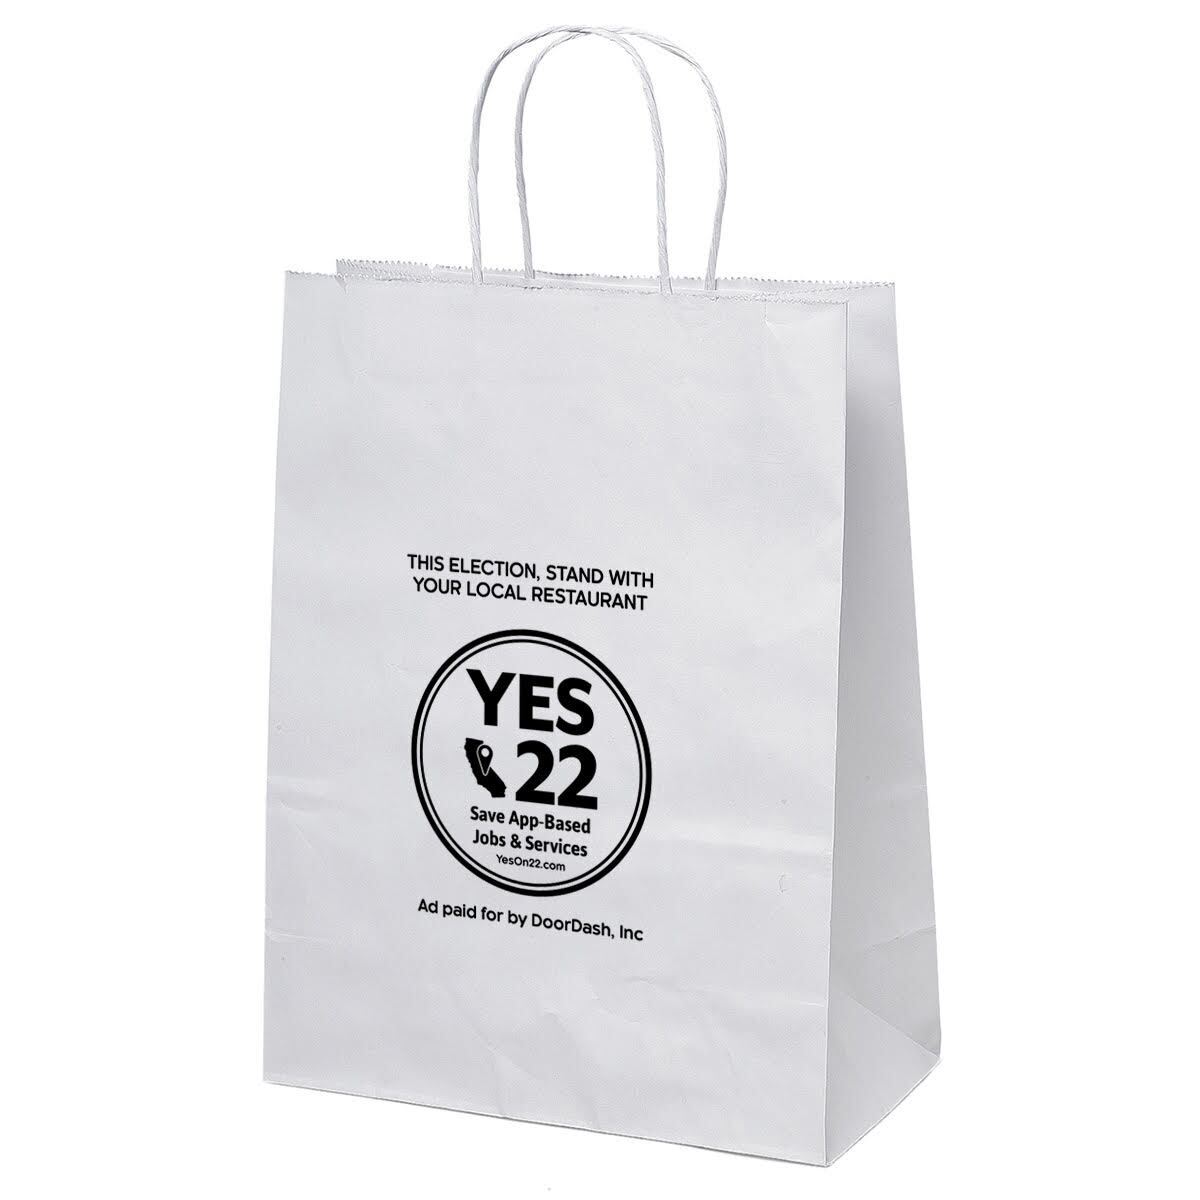 A delivery bag is emblazoned with "Yes 22. Save App-Based Jobs & Services." Below, it says "Ad paid for by DoorDash."